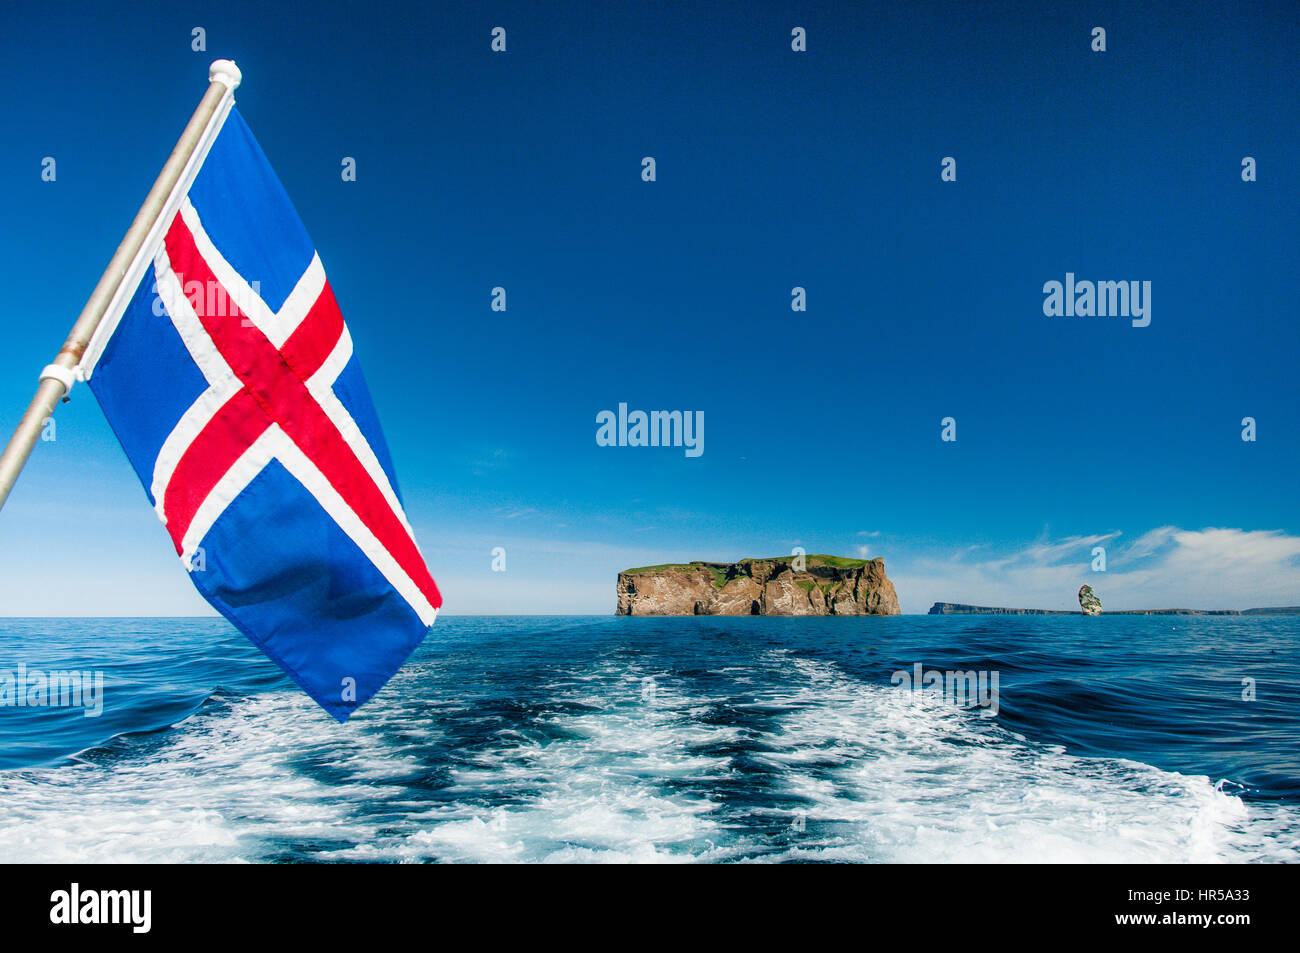 View from boat with Icelandic flag with Drangey Island in background over blue ocean. Stock Photo